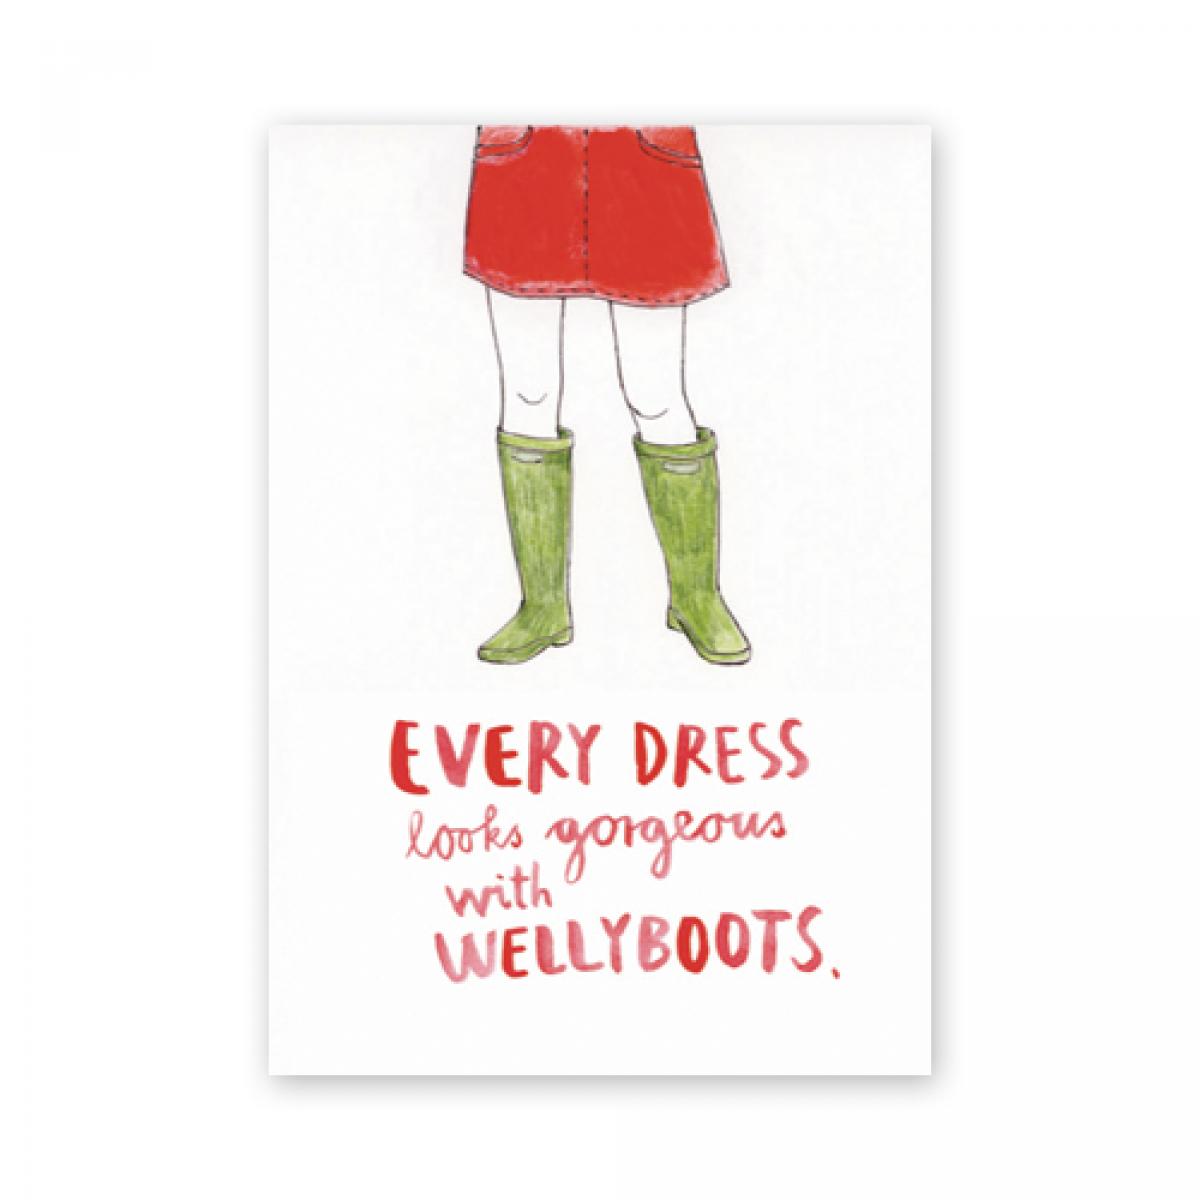 Postkarte: every dress looks gorgeous with wellyboots.